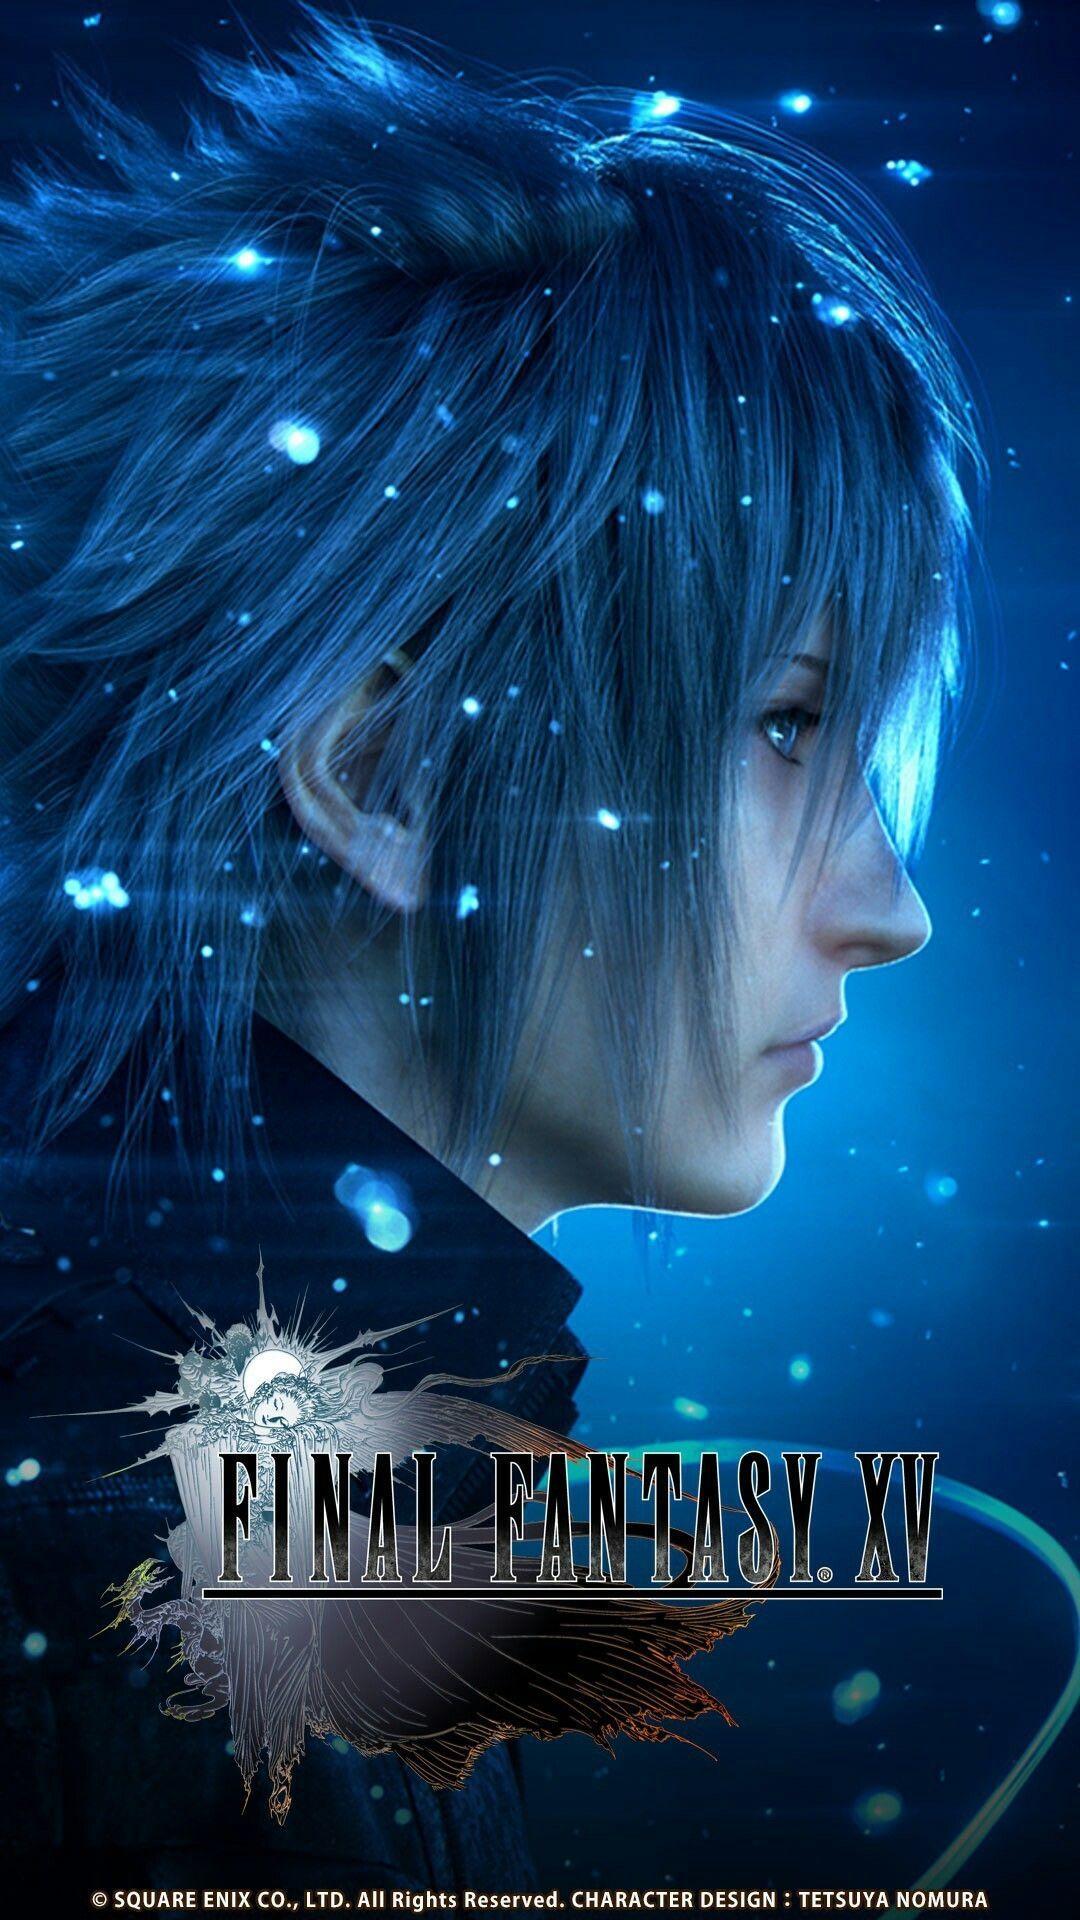 Final Fantasy 15 Noctis Wallpaper For Android On Wallpaper 1080p HD